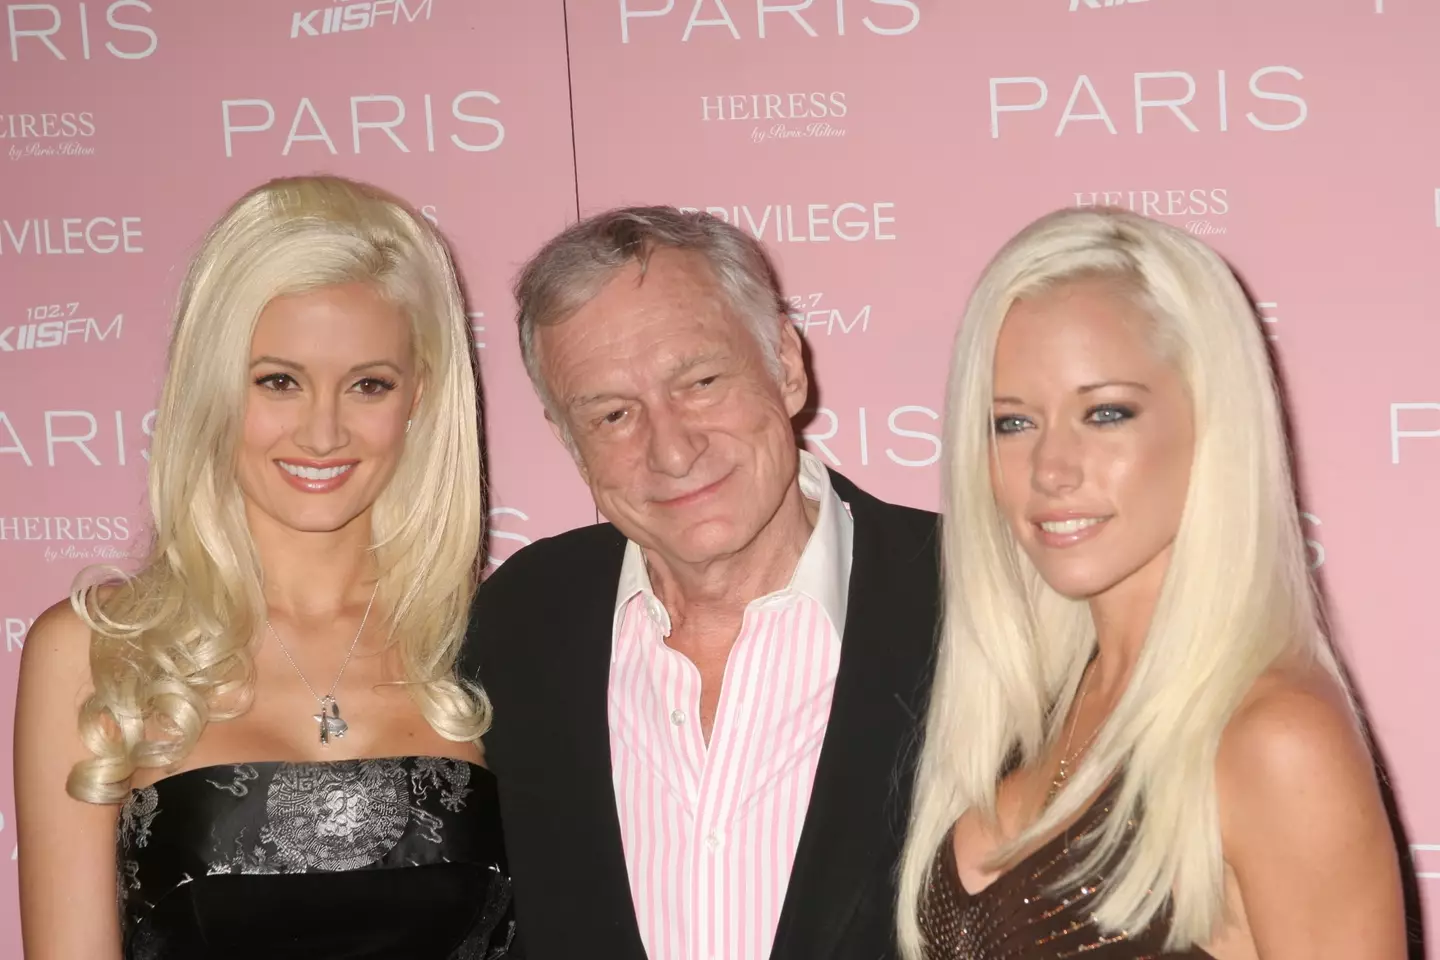 Jackie Hatten claims men at the Playboy mansion tried to offer her drugs and alcohol.